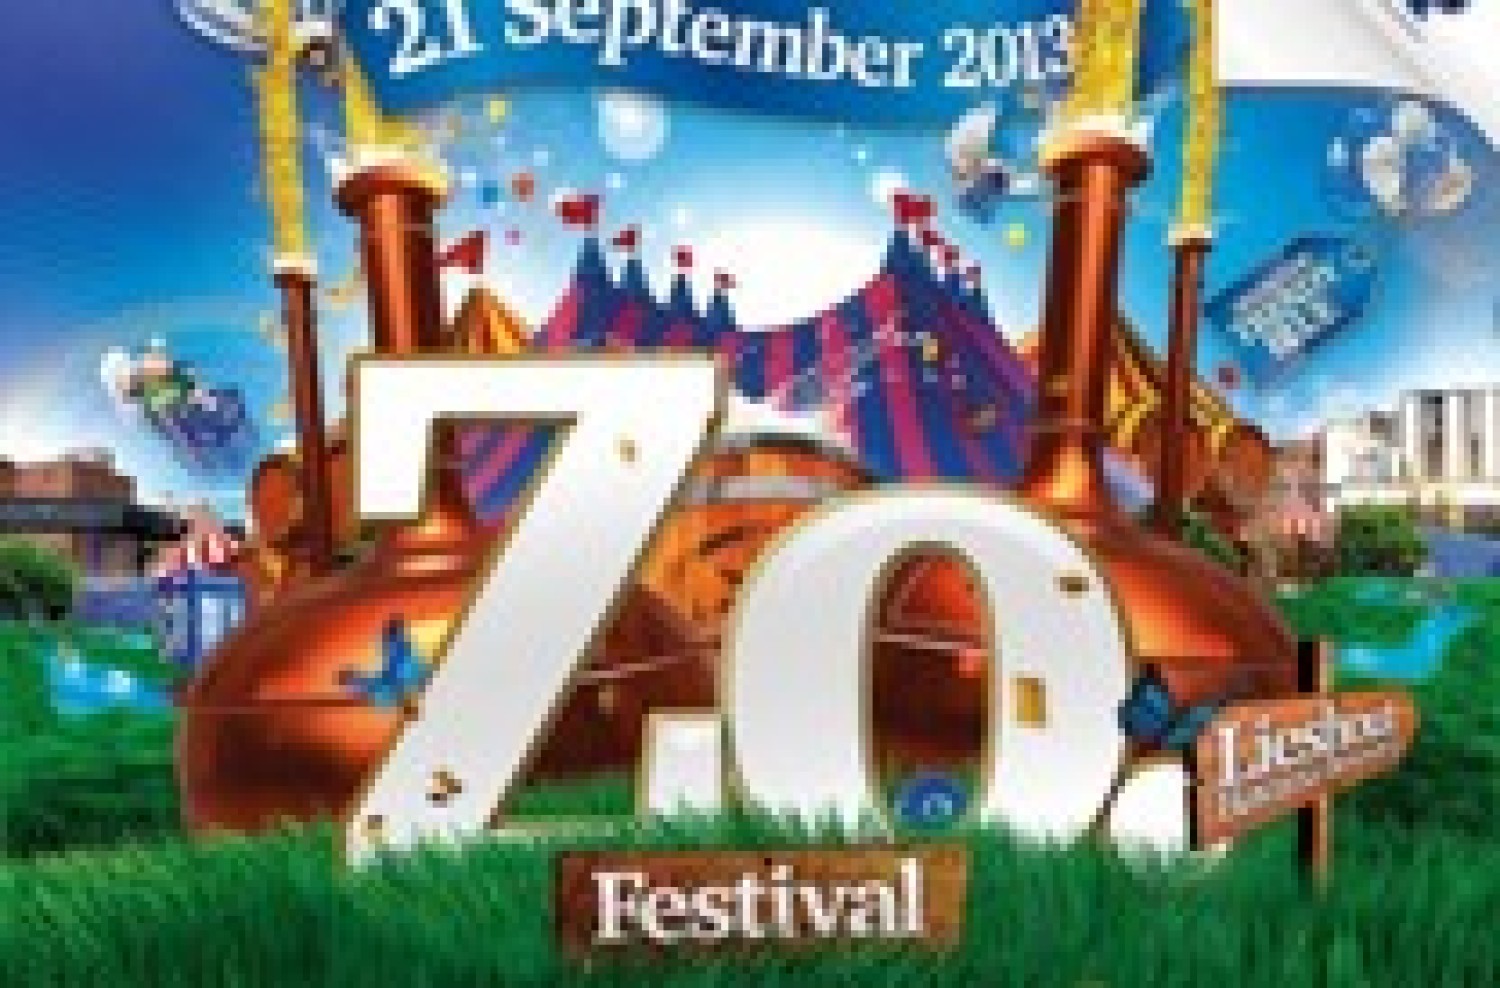 Party report: Zo. Festival, Lieshout, 21 september 2013